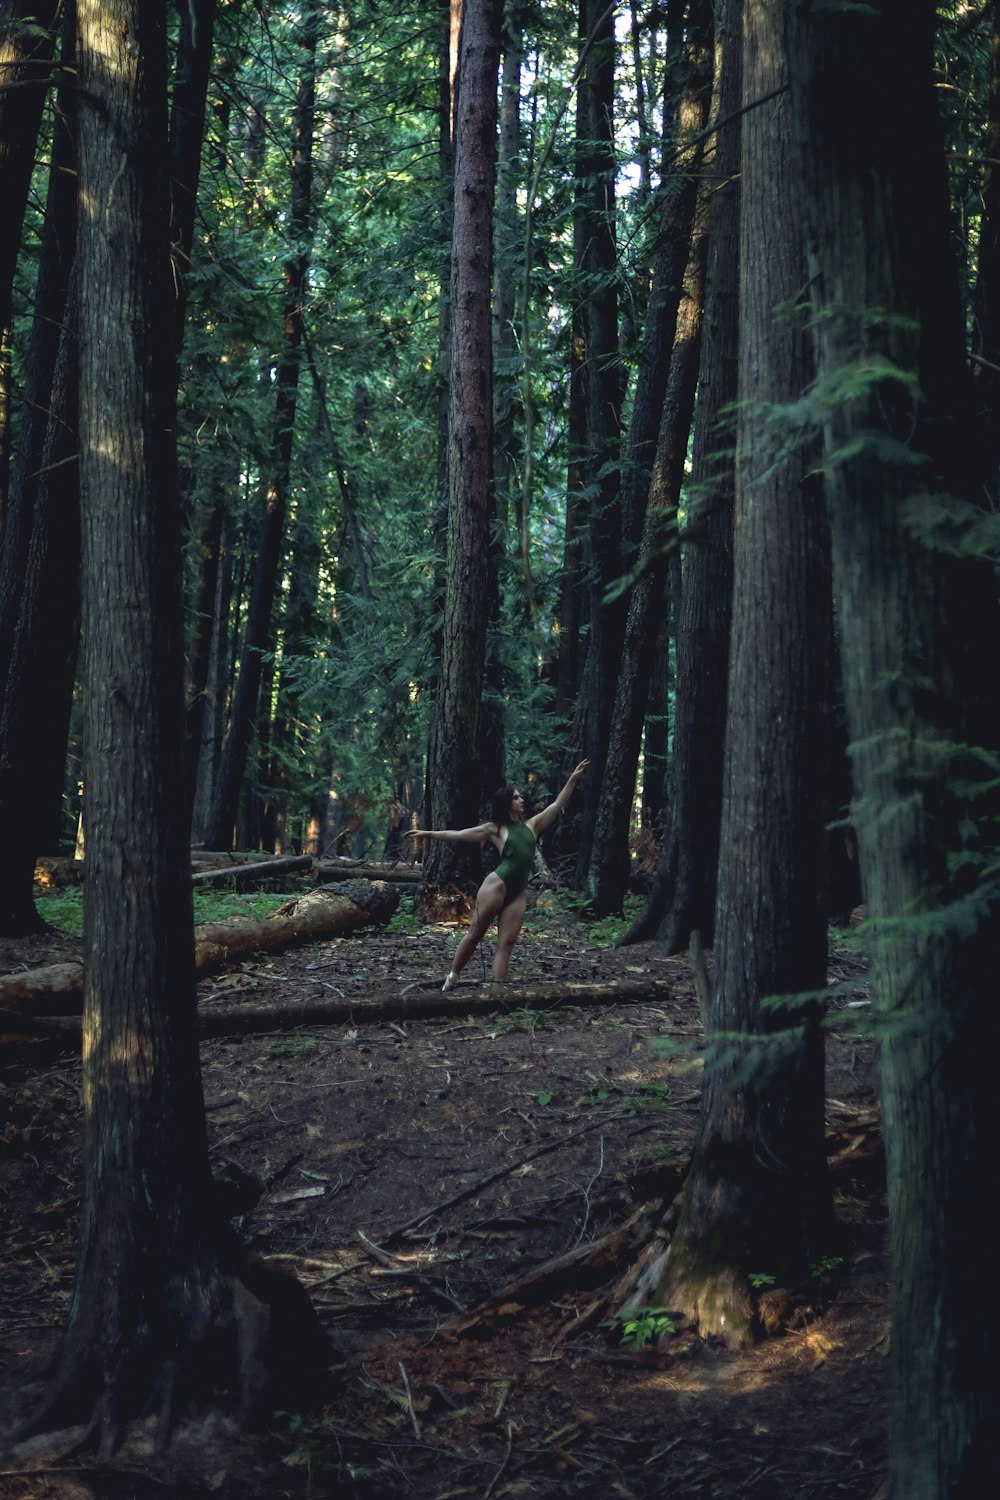 a person jumping in the air in a forest